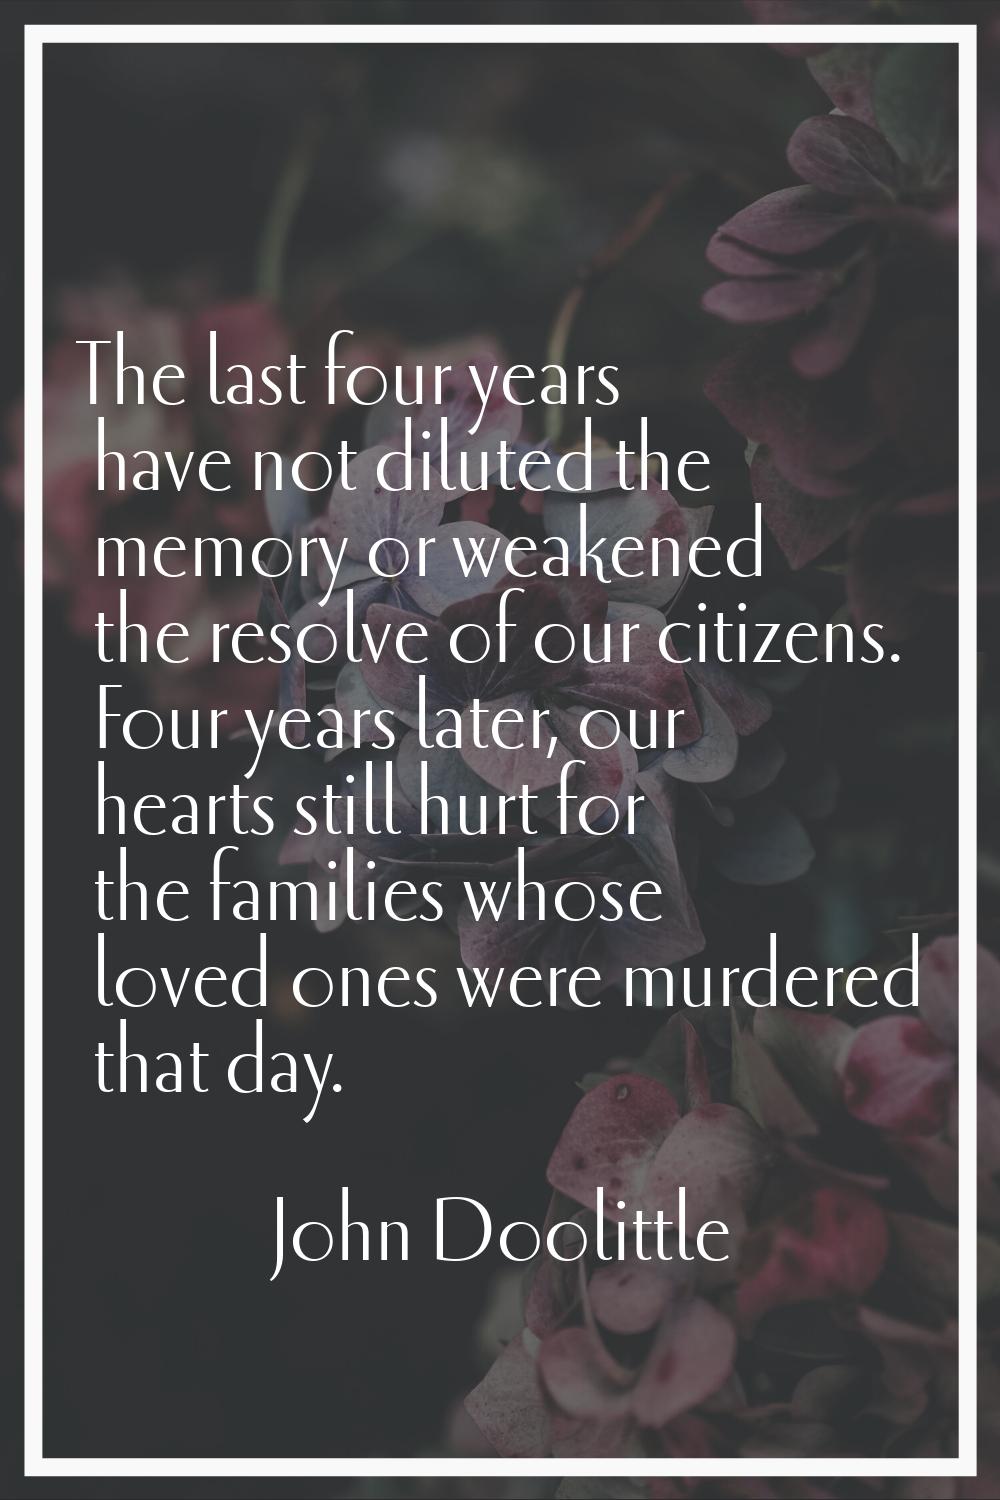 The last four years have not diluted the memory or weakened the resolve of our citizens. Four years